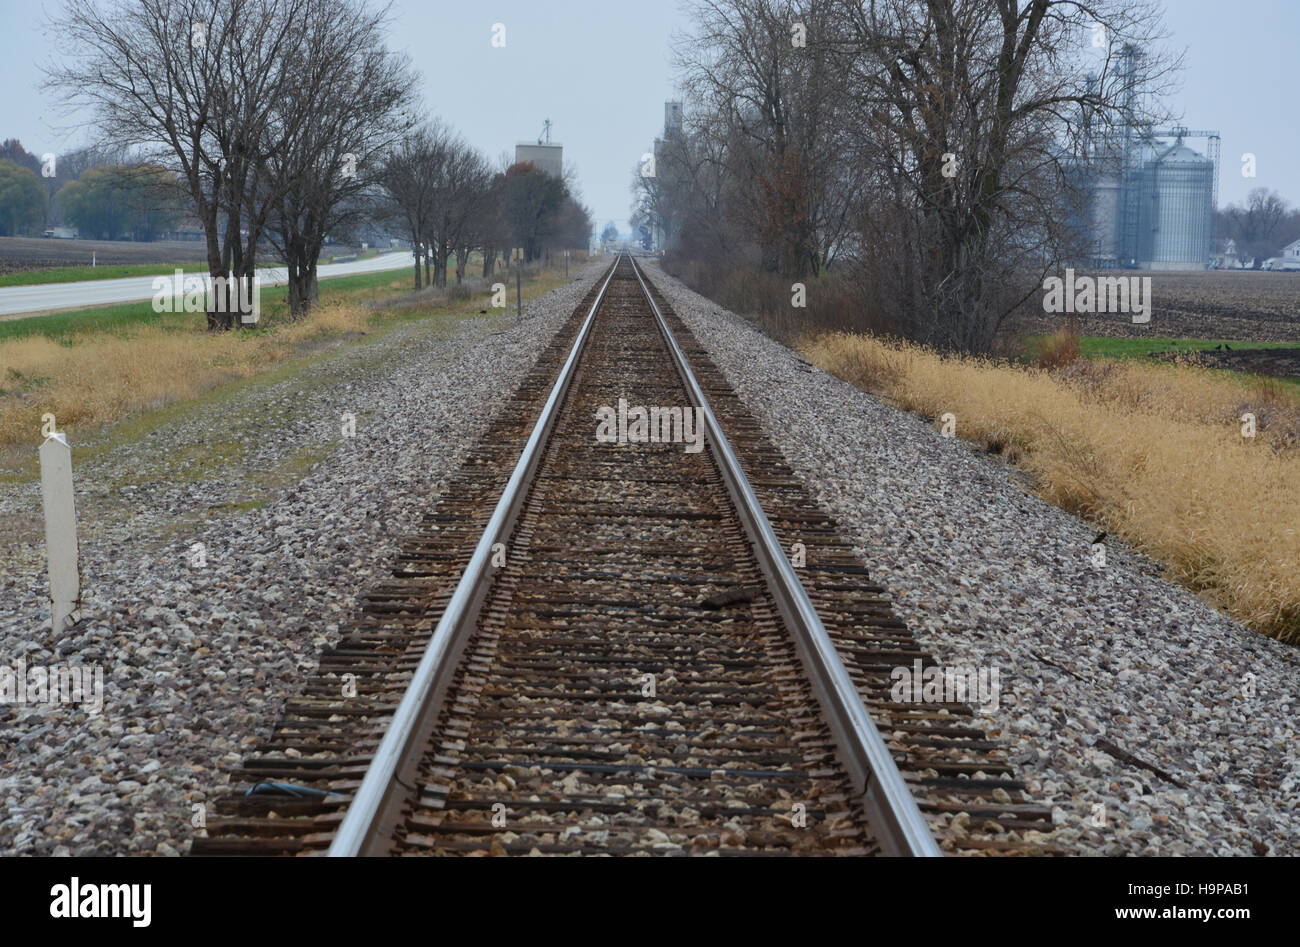 Rail road tracks stretch off into the distance under cold gray November skies in the Midwestern United States. Stock Photo